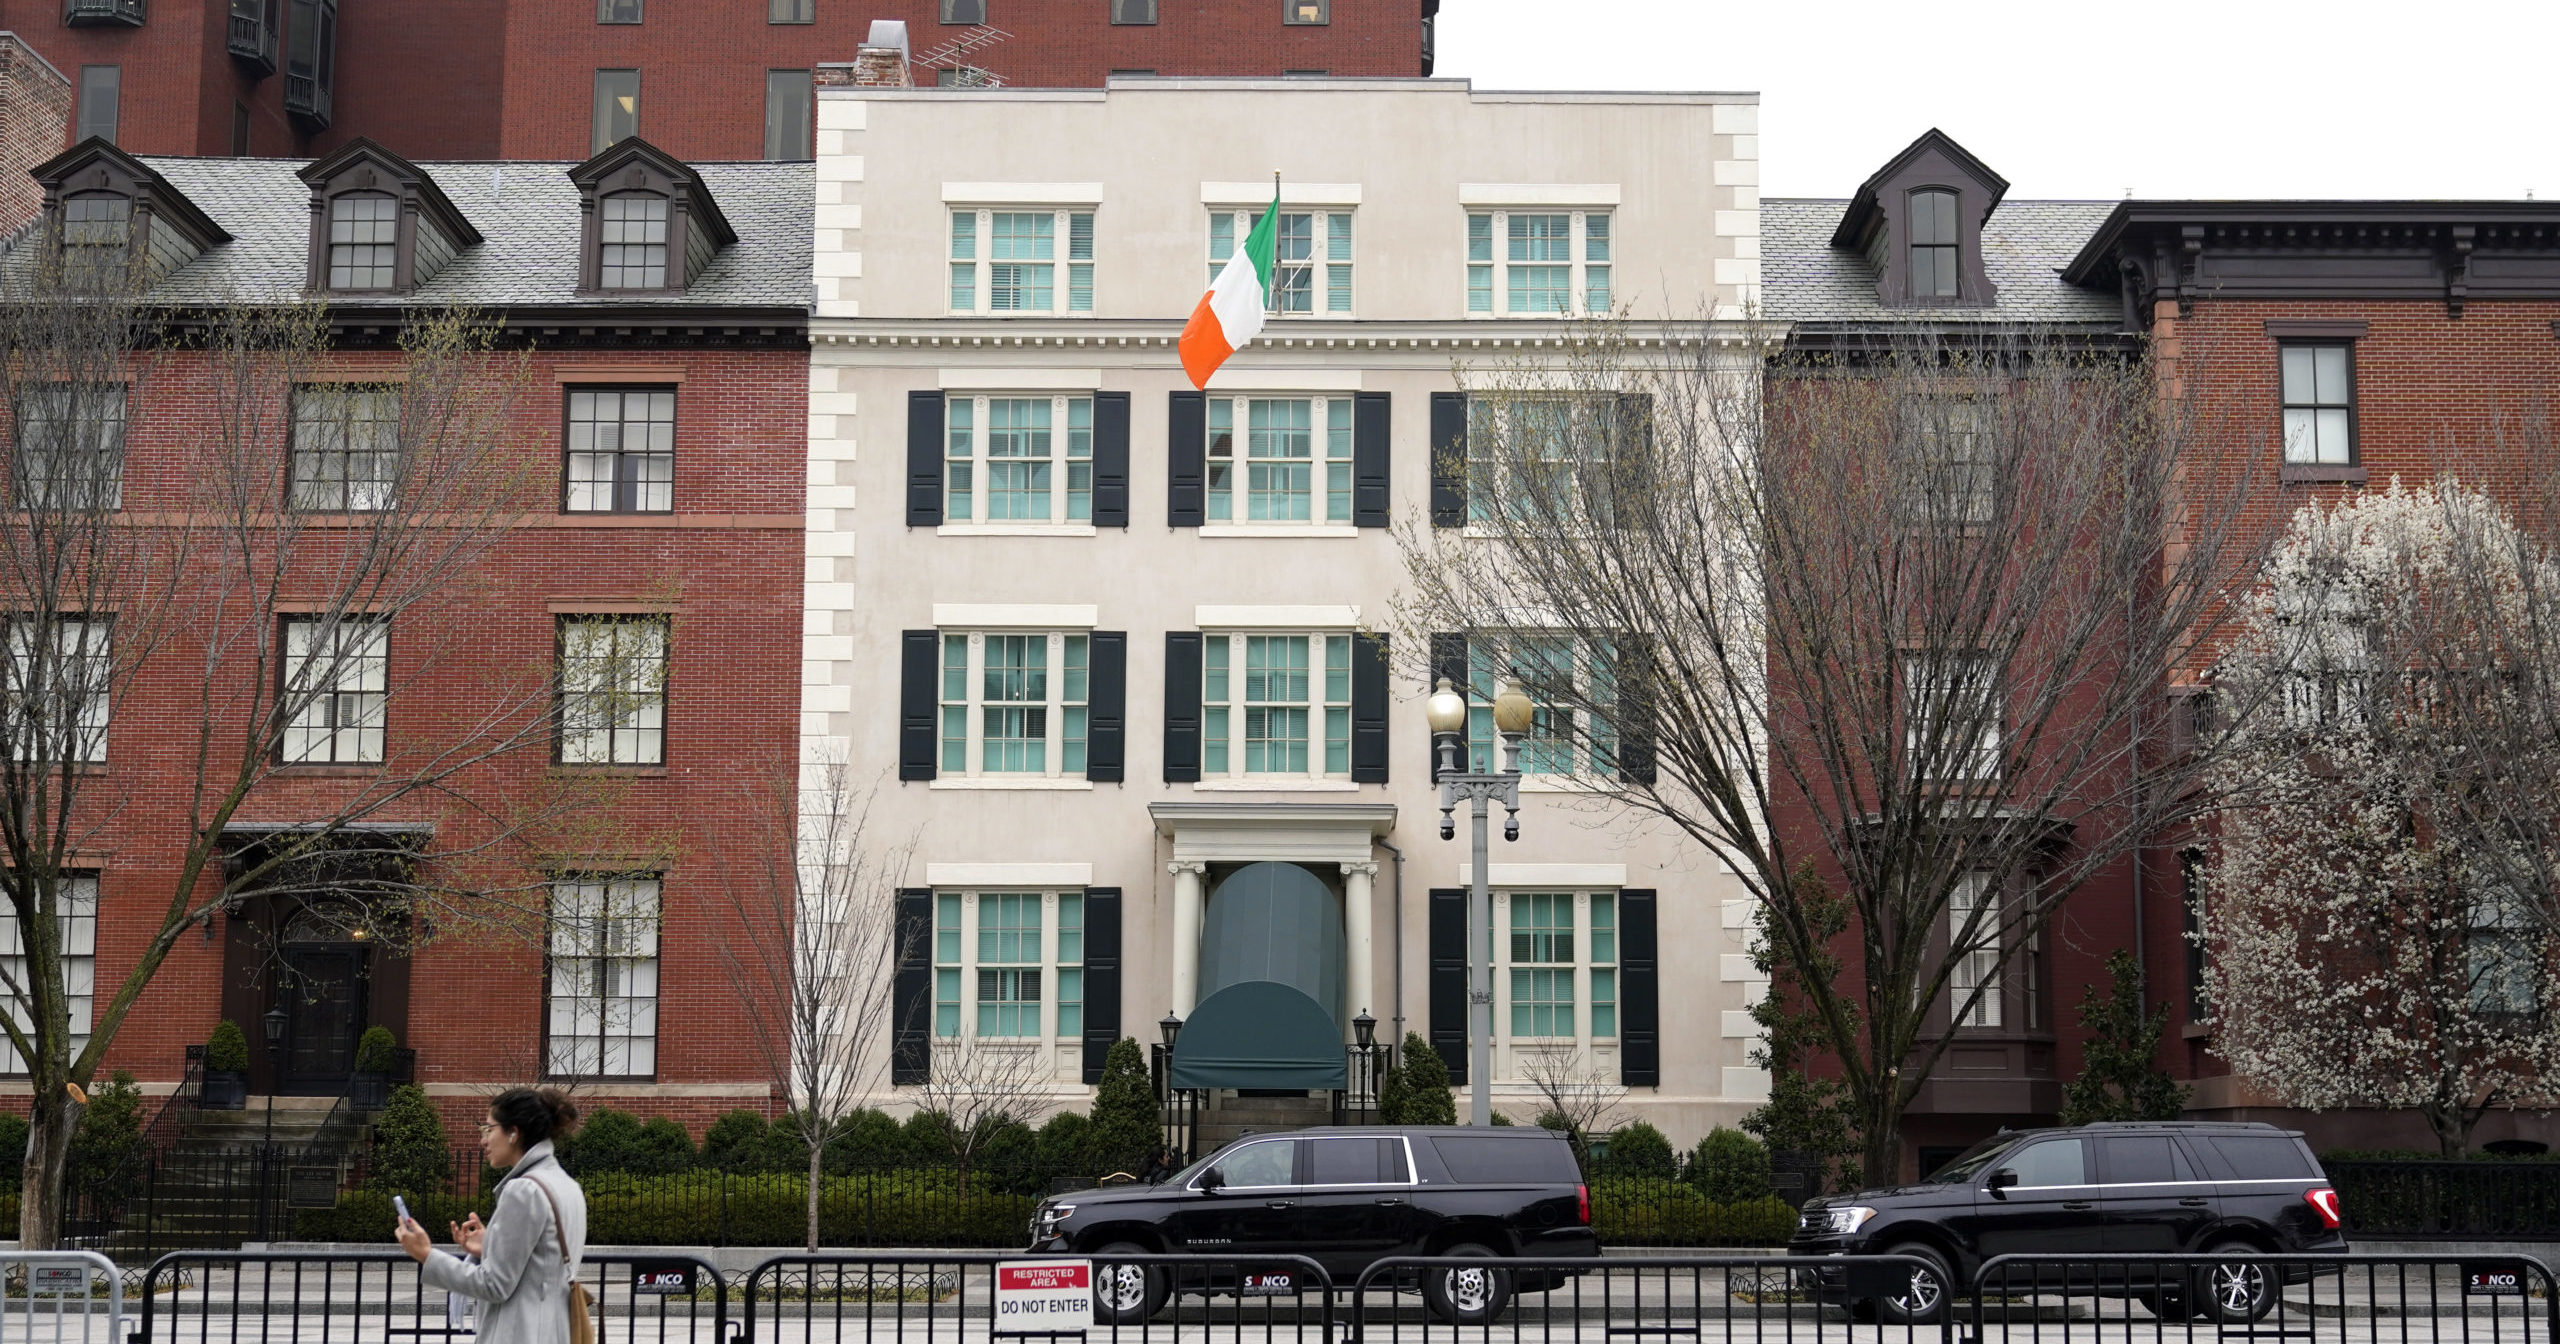 The Irish flag flies at Blair House across the street from the White House in Washington, D.C., on Thursday.